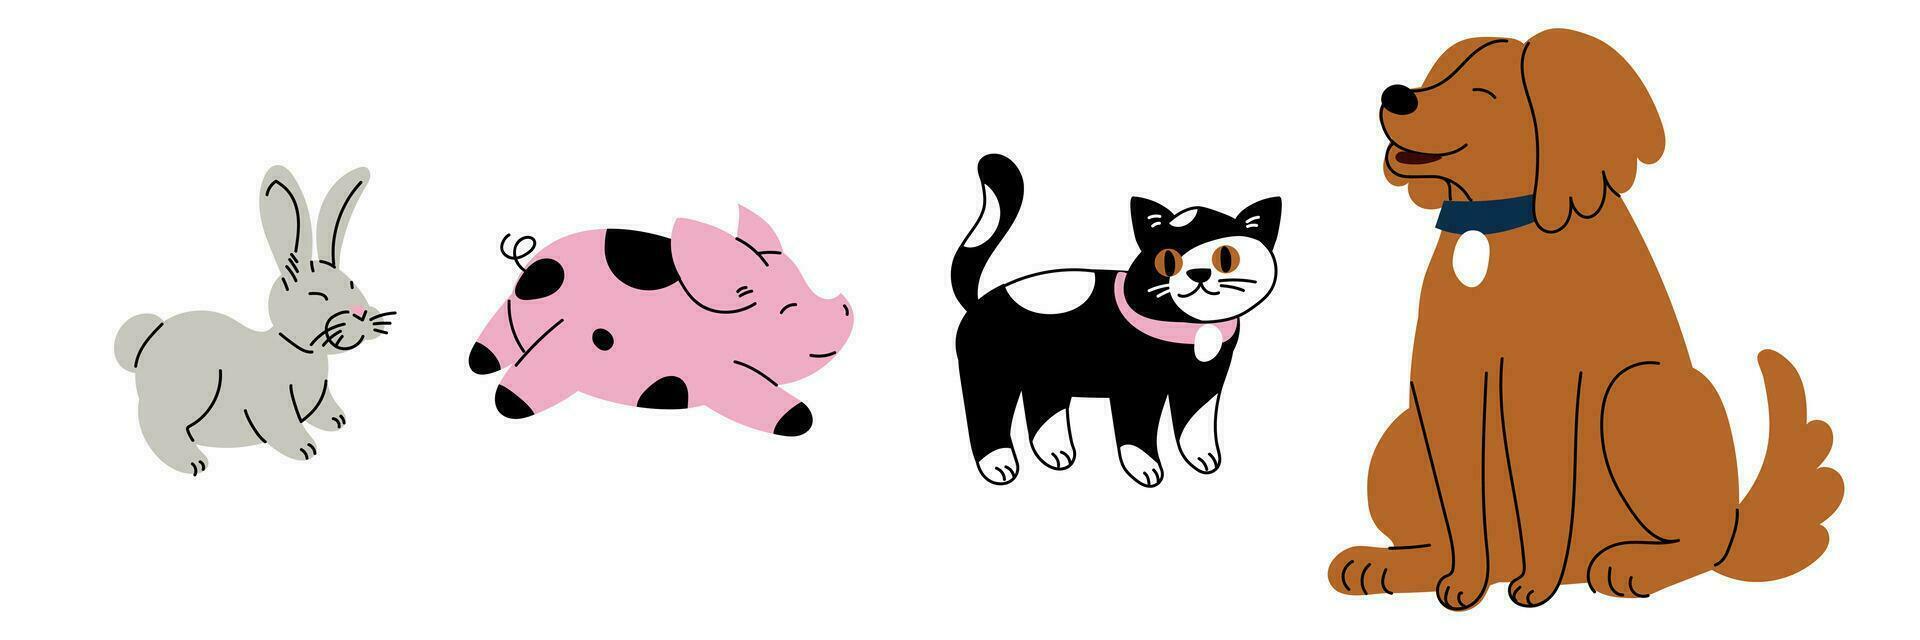 A set of animals dog, pig, cat, rabbit isolated on a white background. Flat vector illustration. Colorful pets. Cute fluffy animals